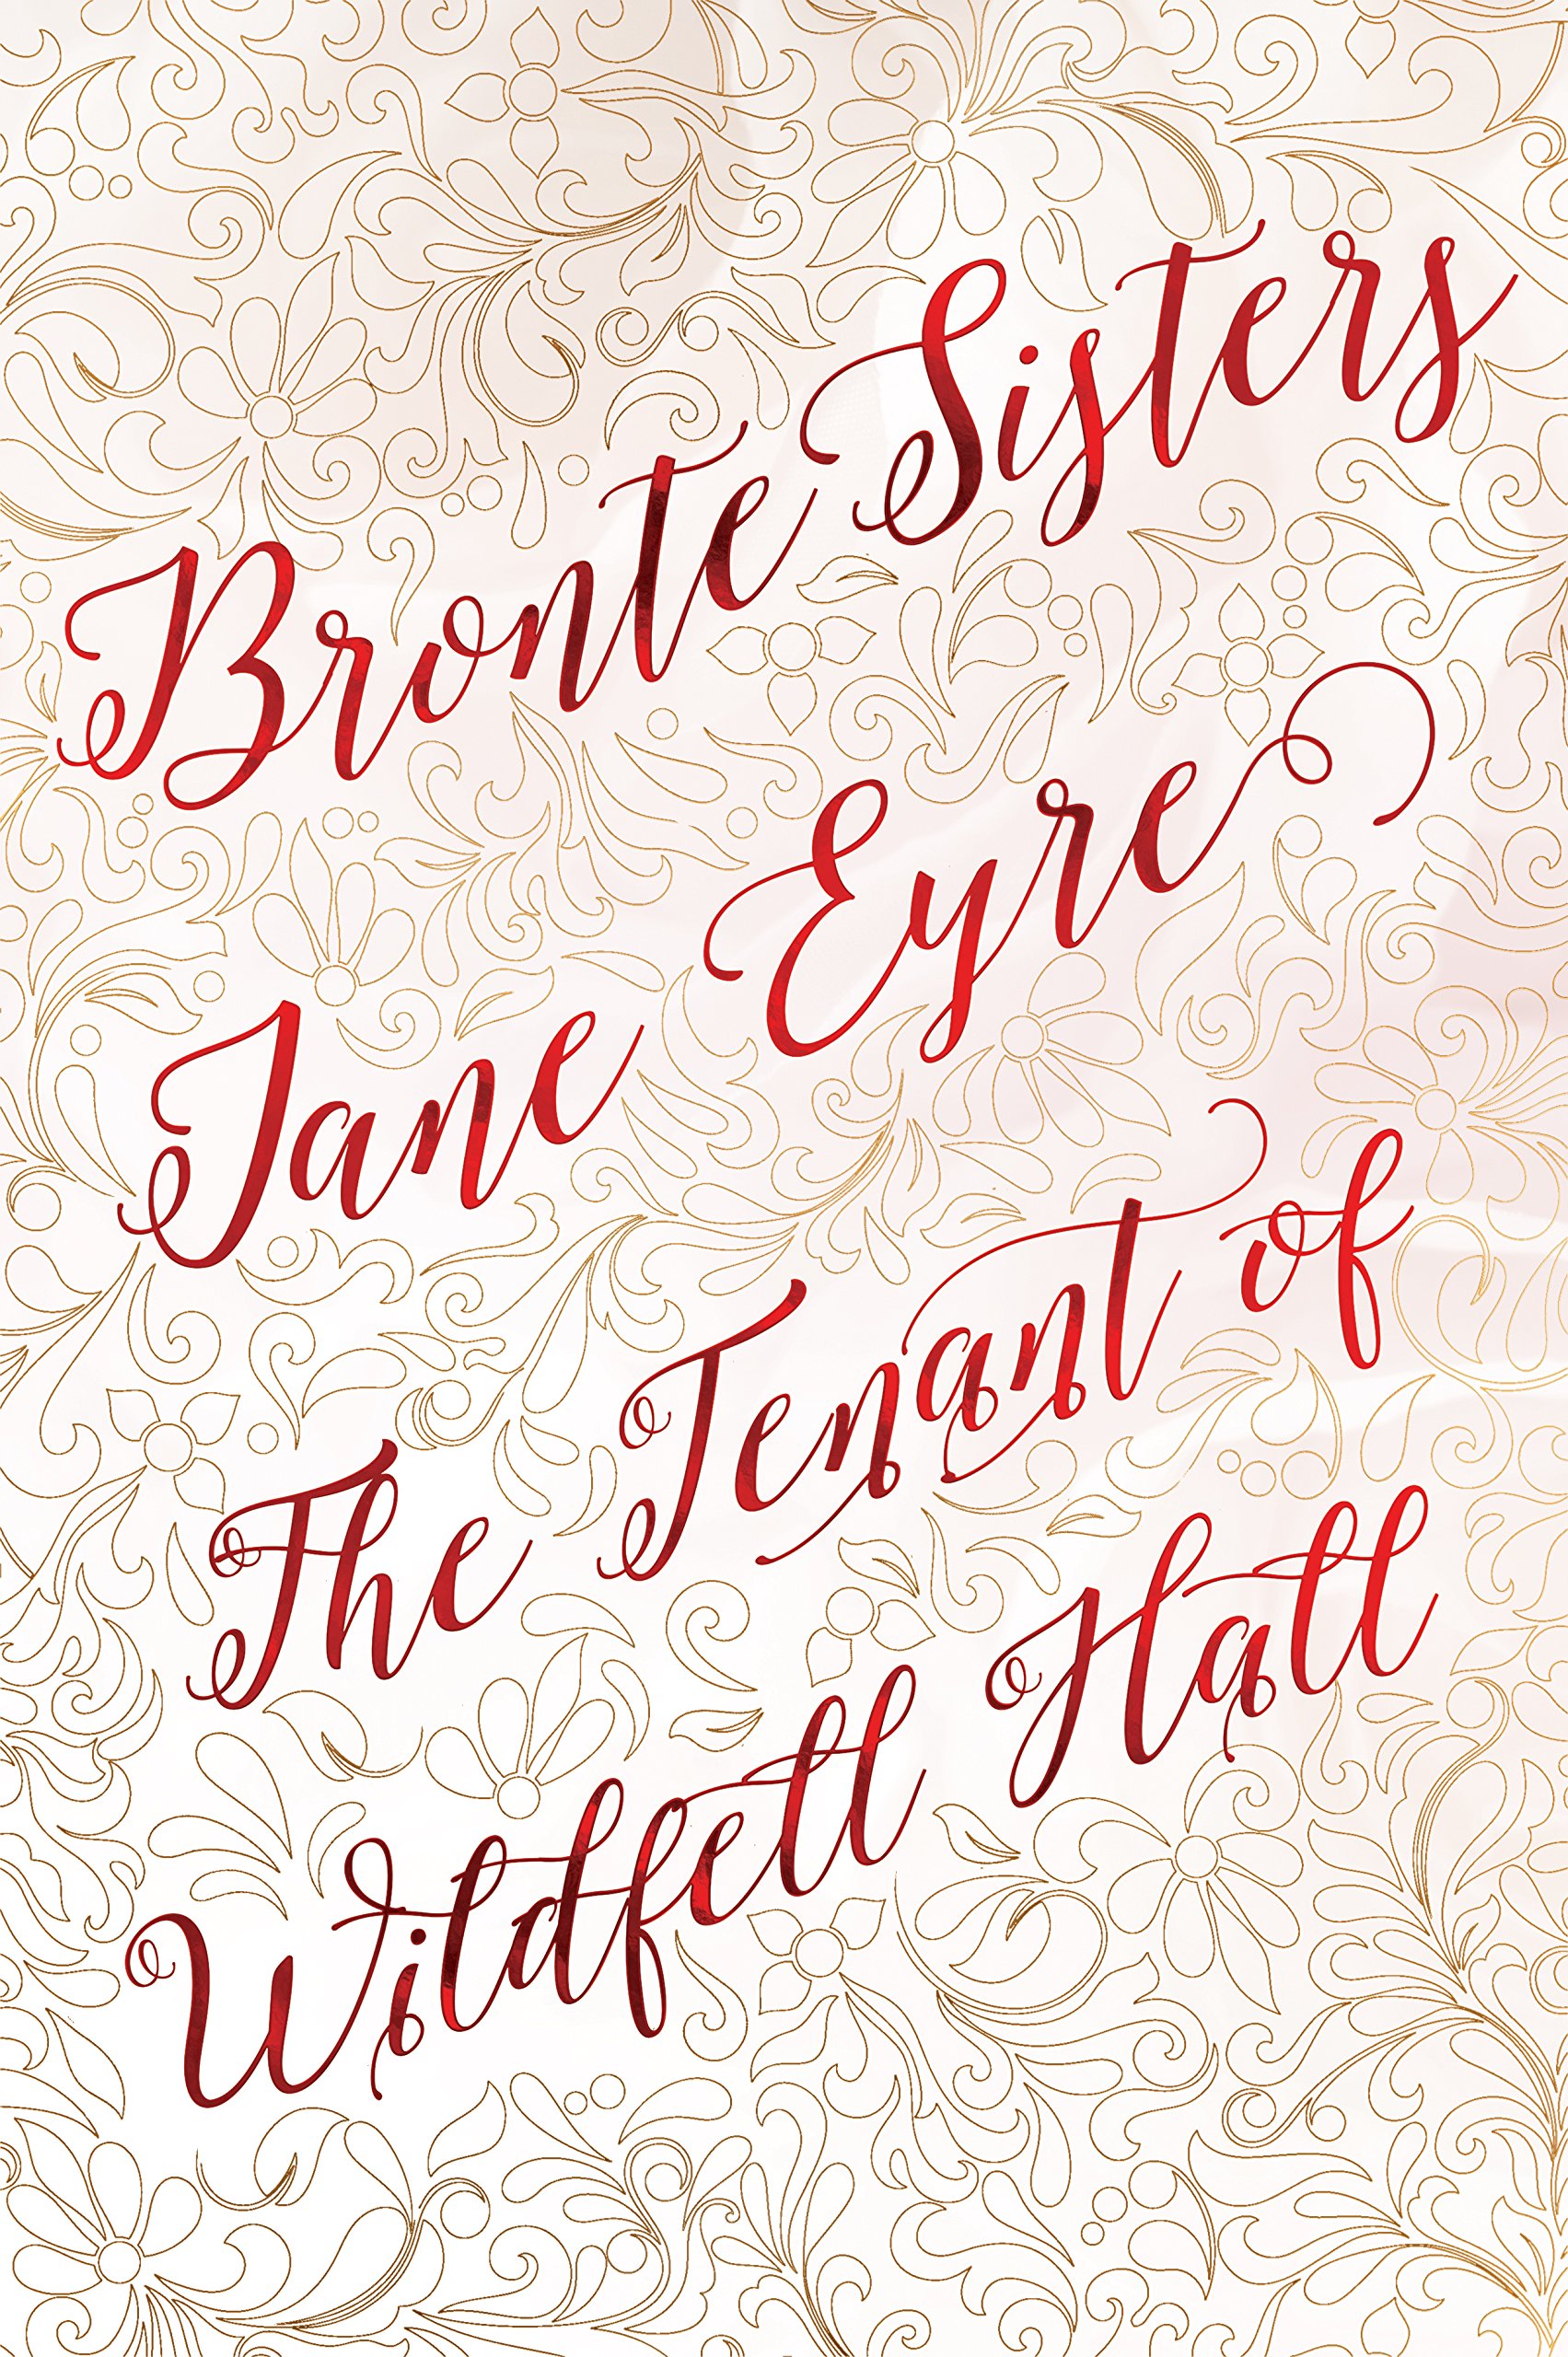 Jane Eyre / The Tenant of Wildfell Hall - Deluxe Edition